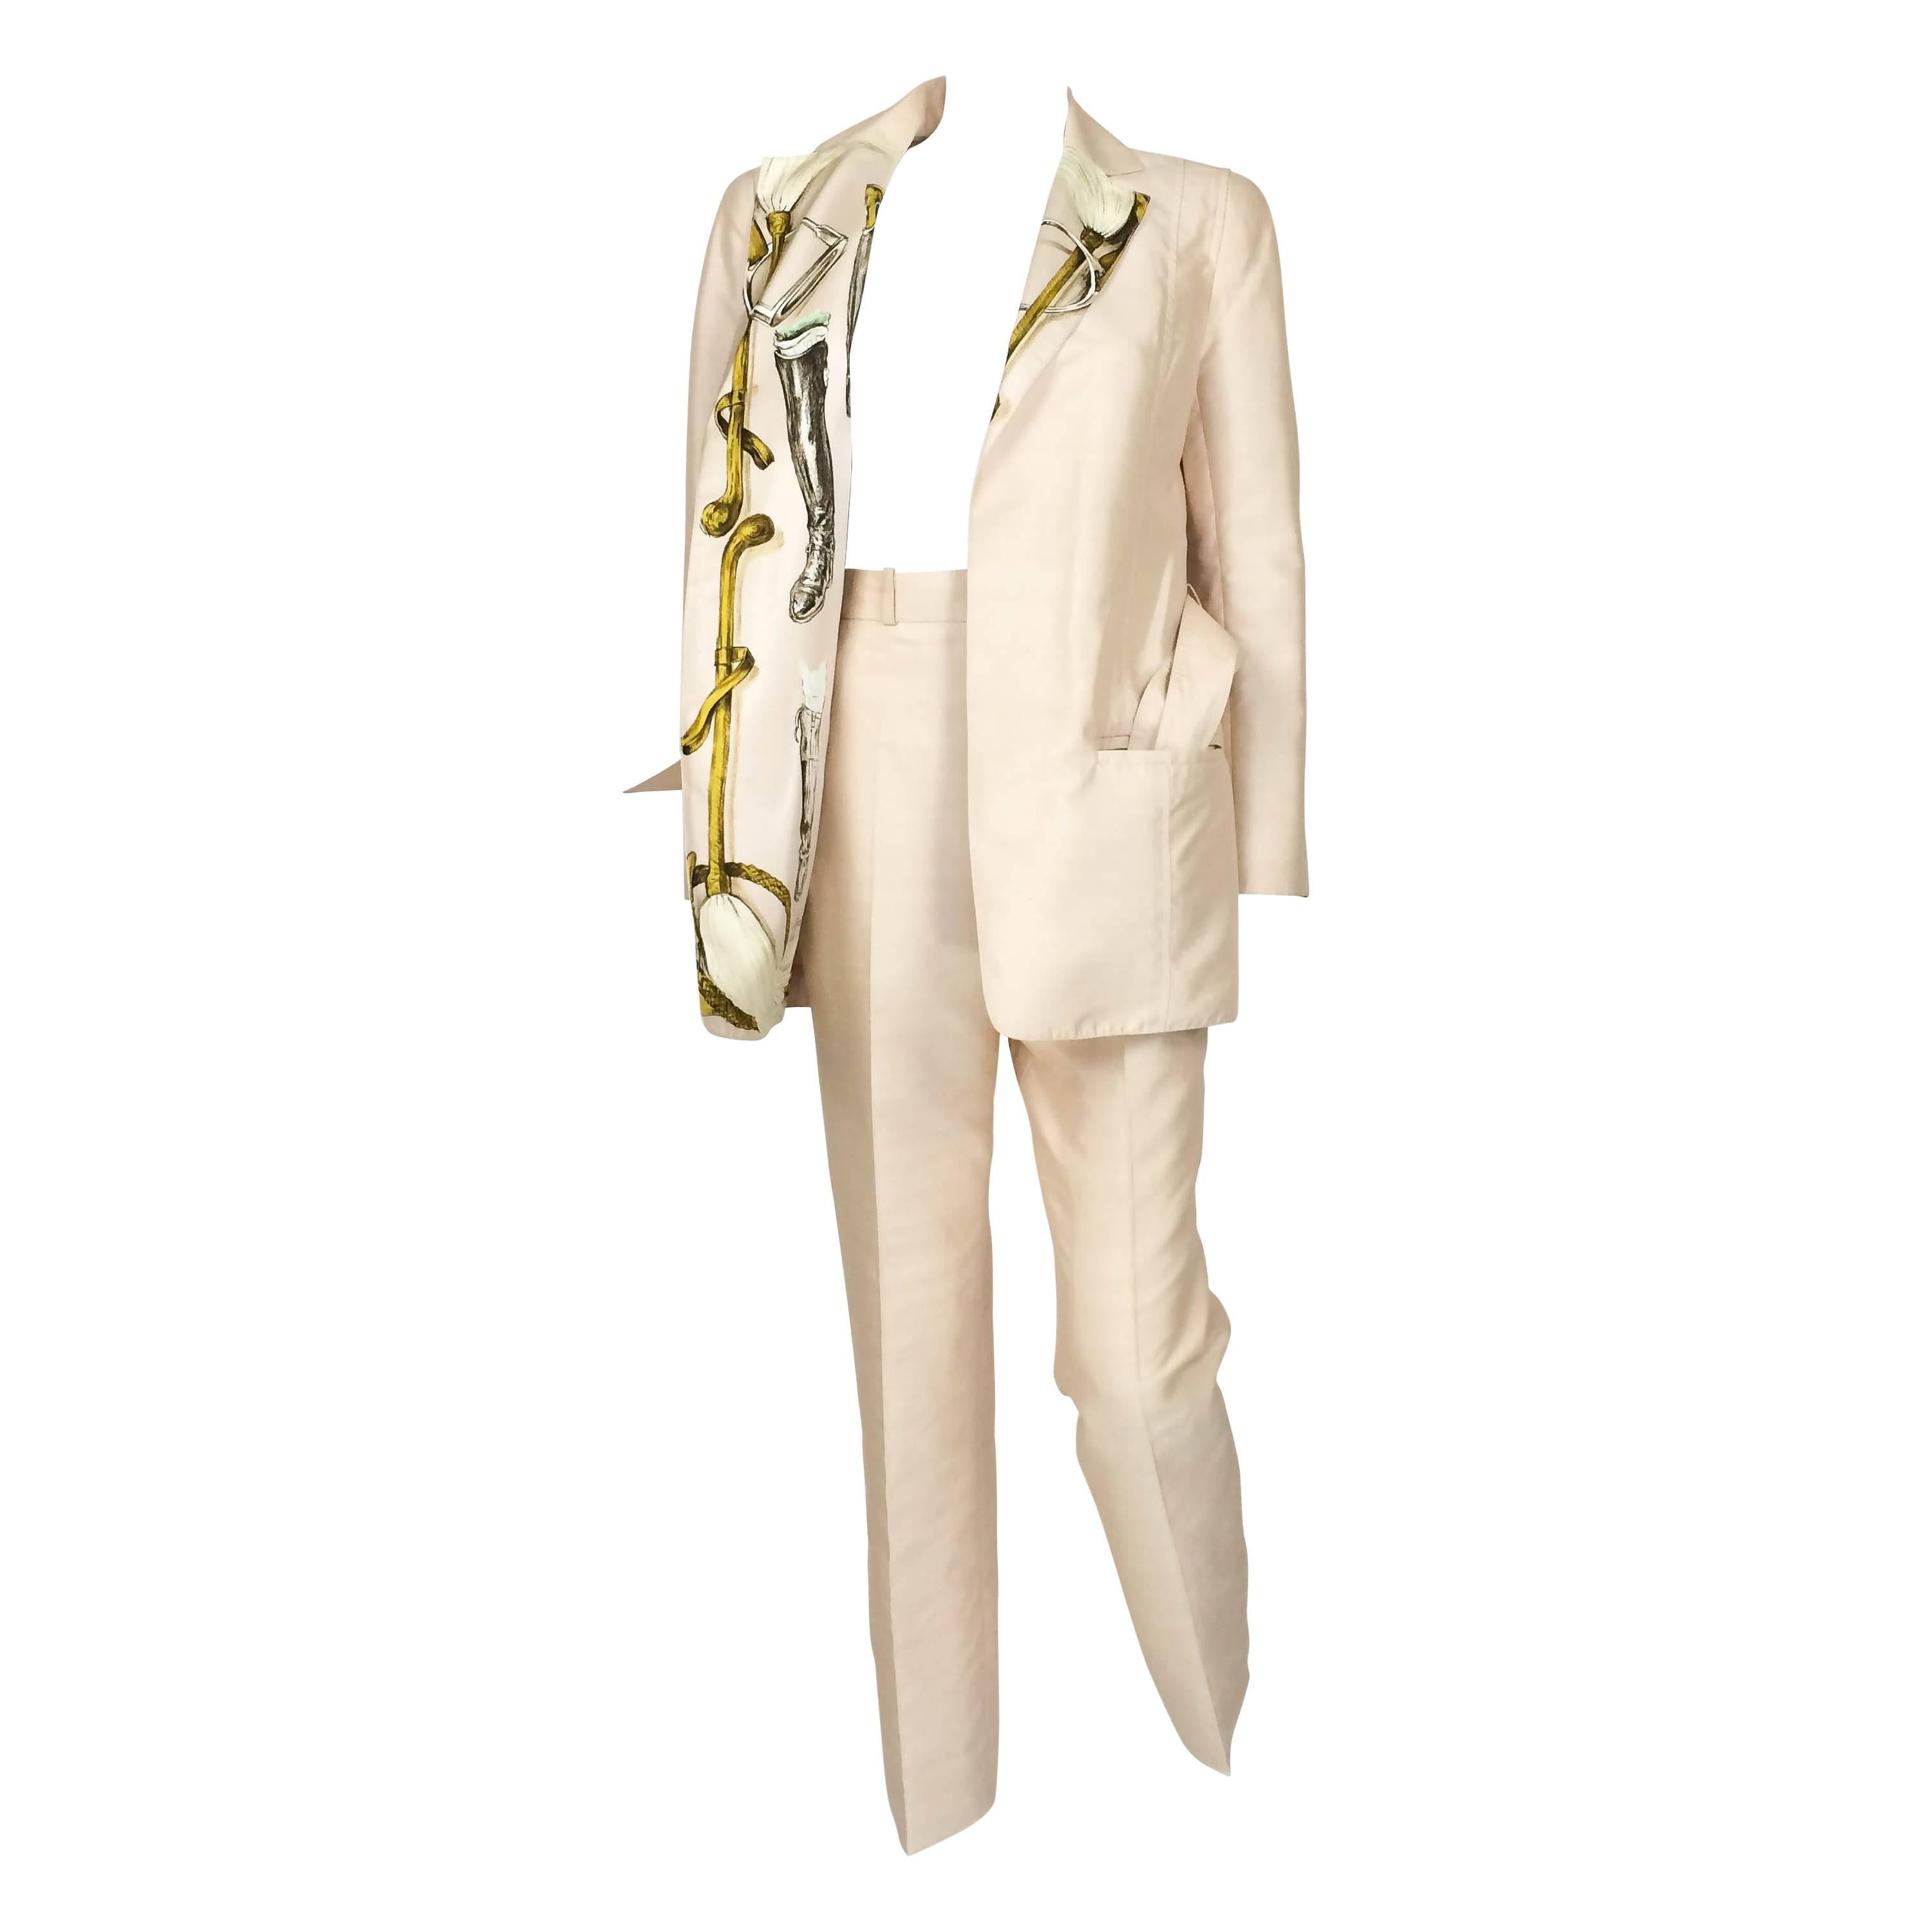 Rare Hermes Suit with 'A Propos de Bottes' Print on Lapels and Lining - 1980s